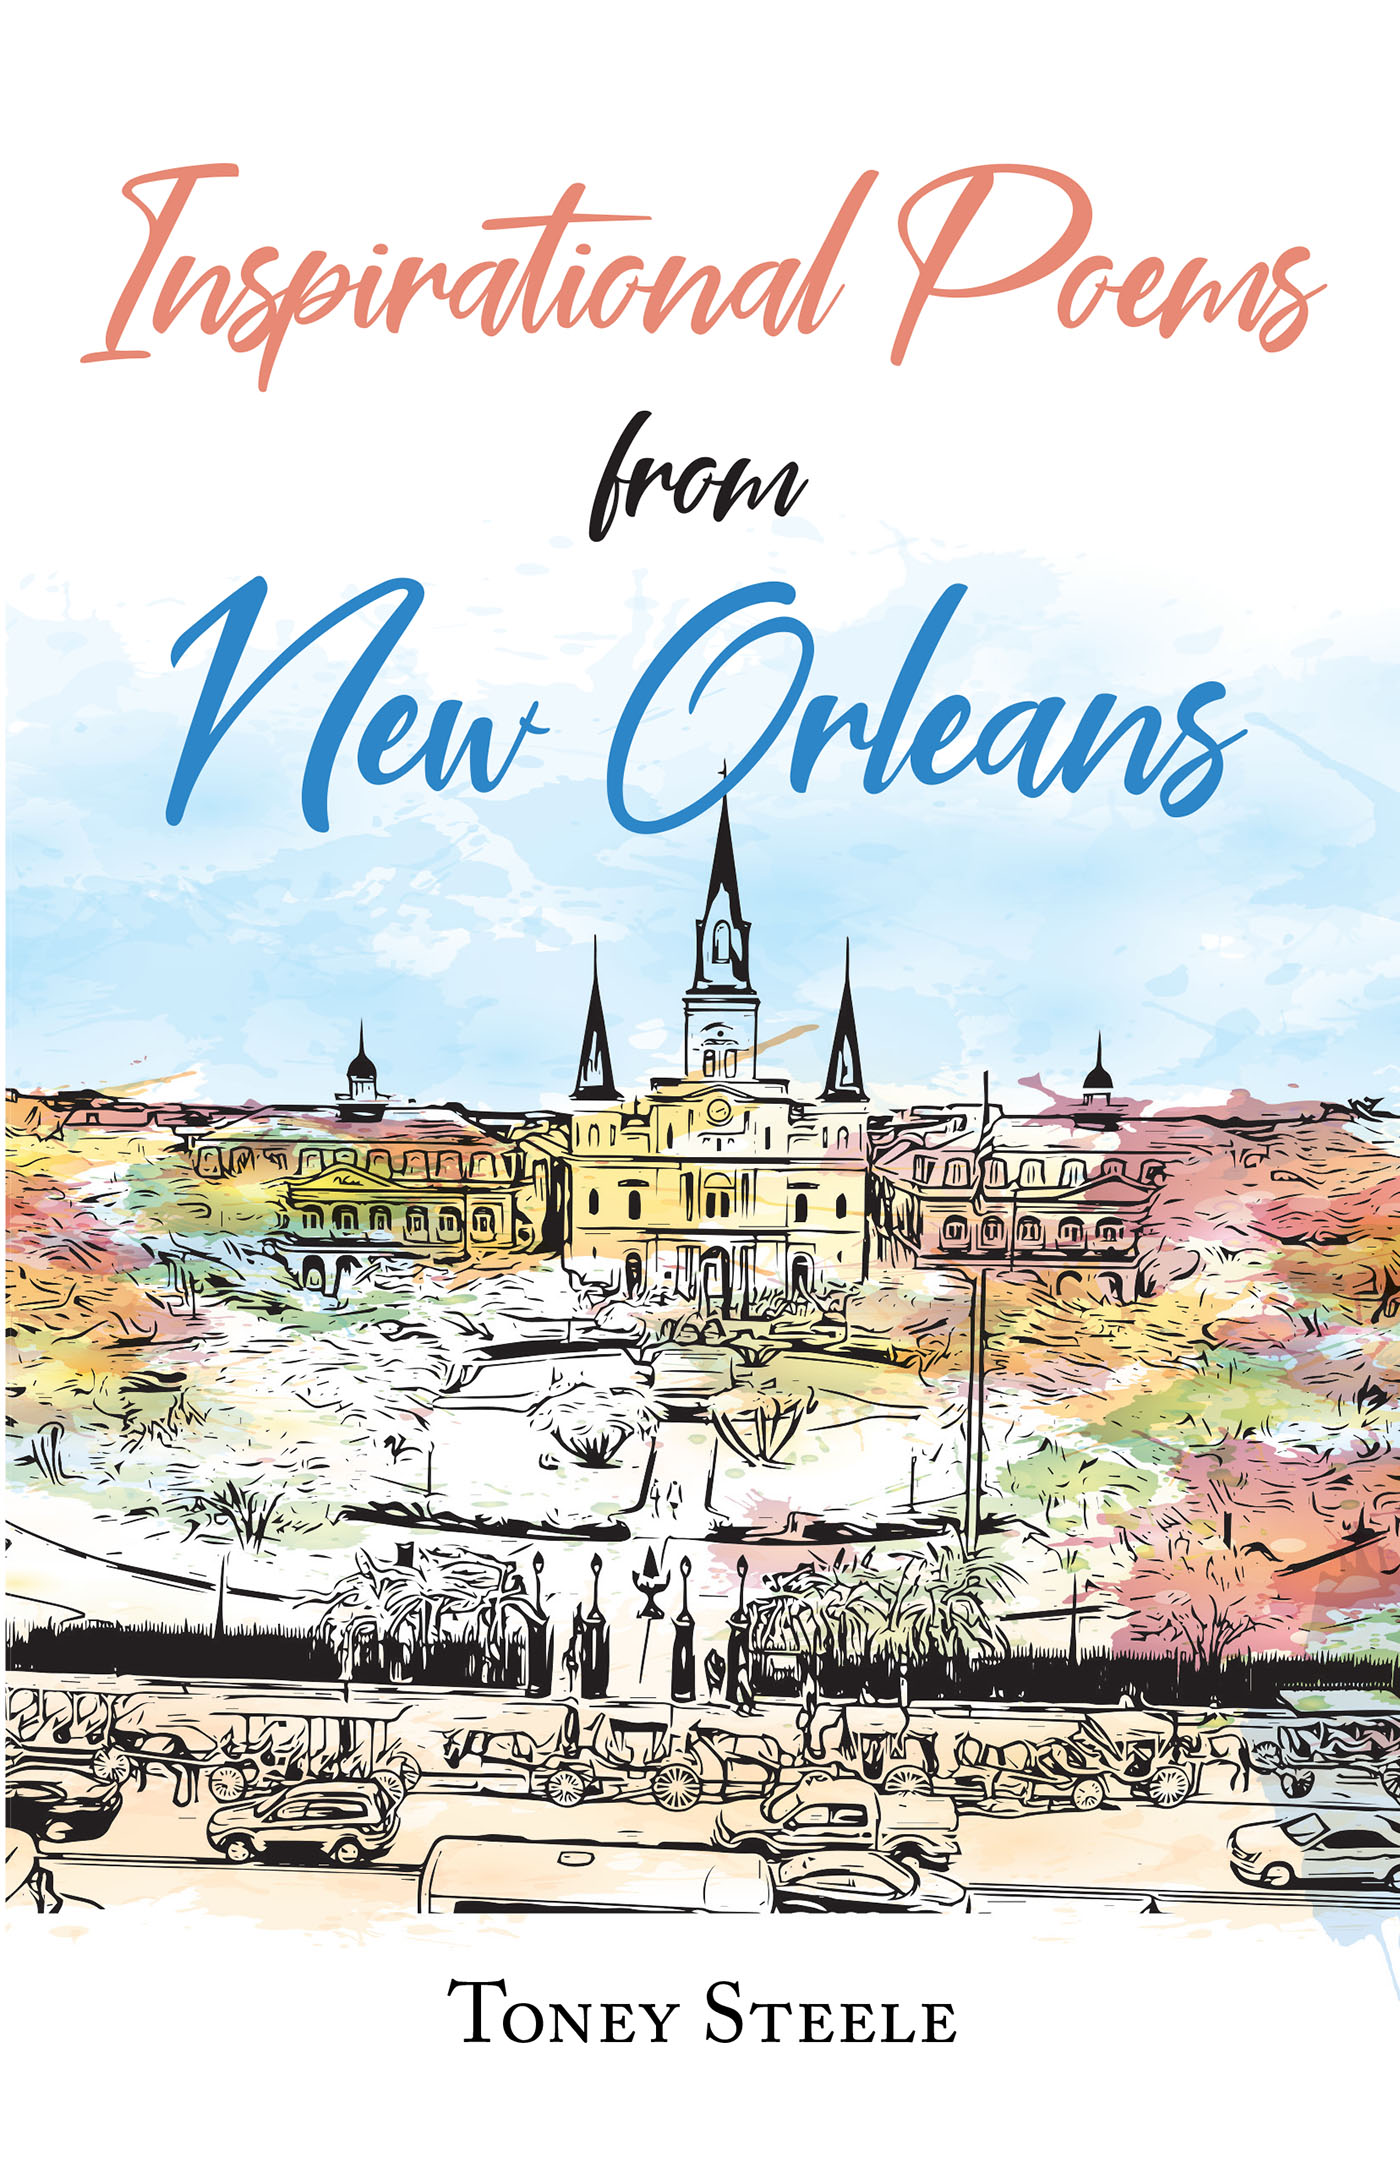 Toney Steele’s Newly Released "Inspirational Poems from New Orleans" is an Enjoyable and Thoughtful Collection of Poetry